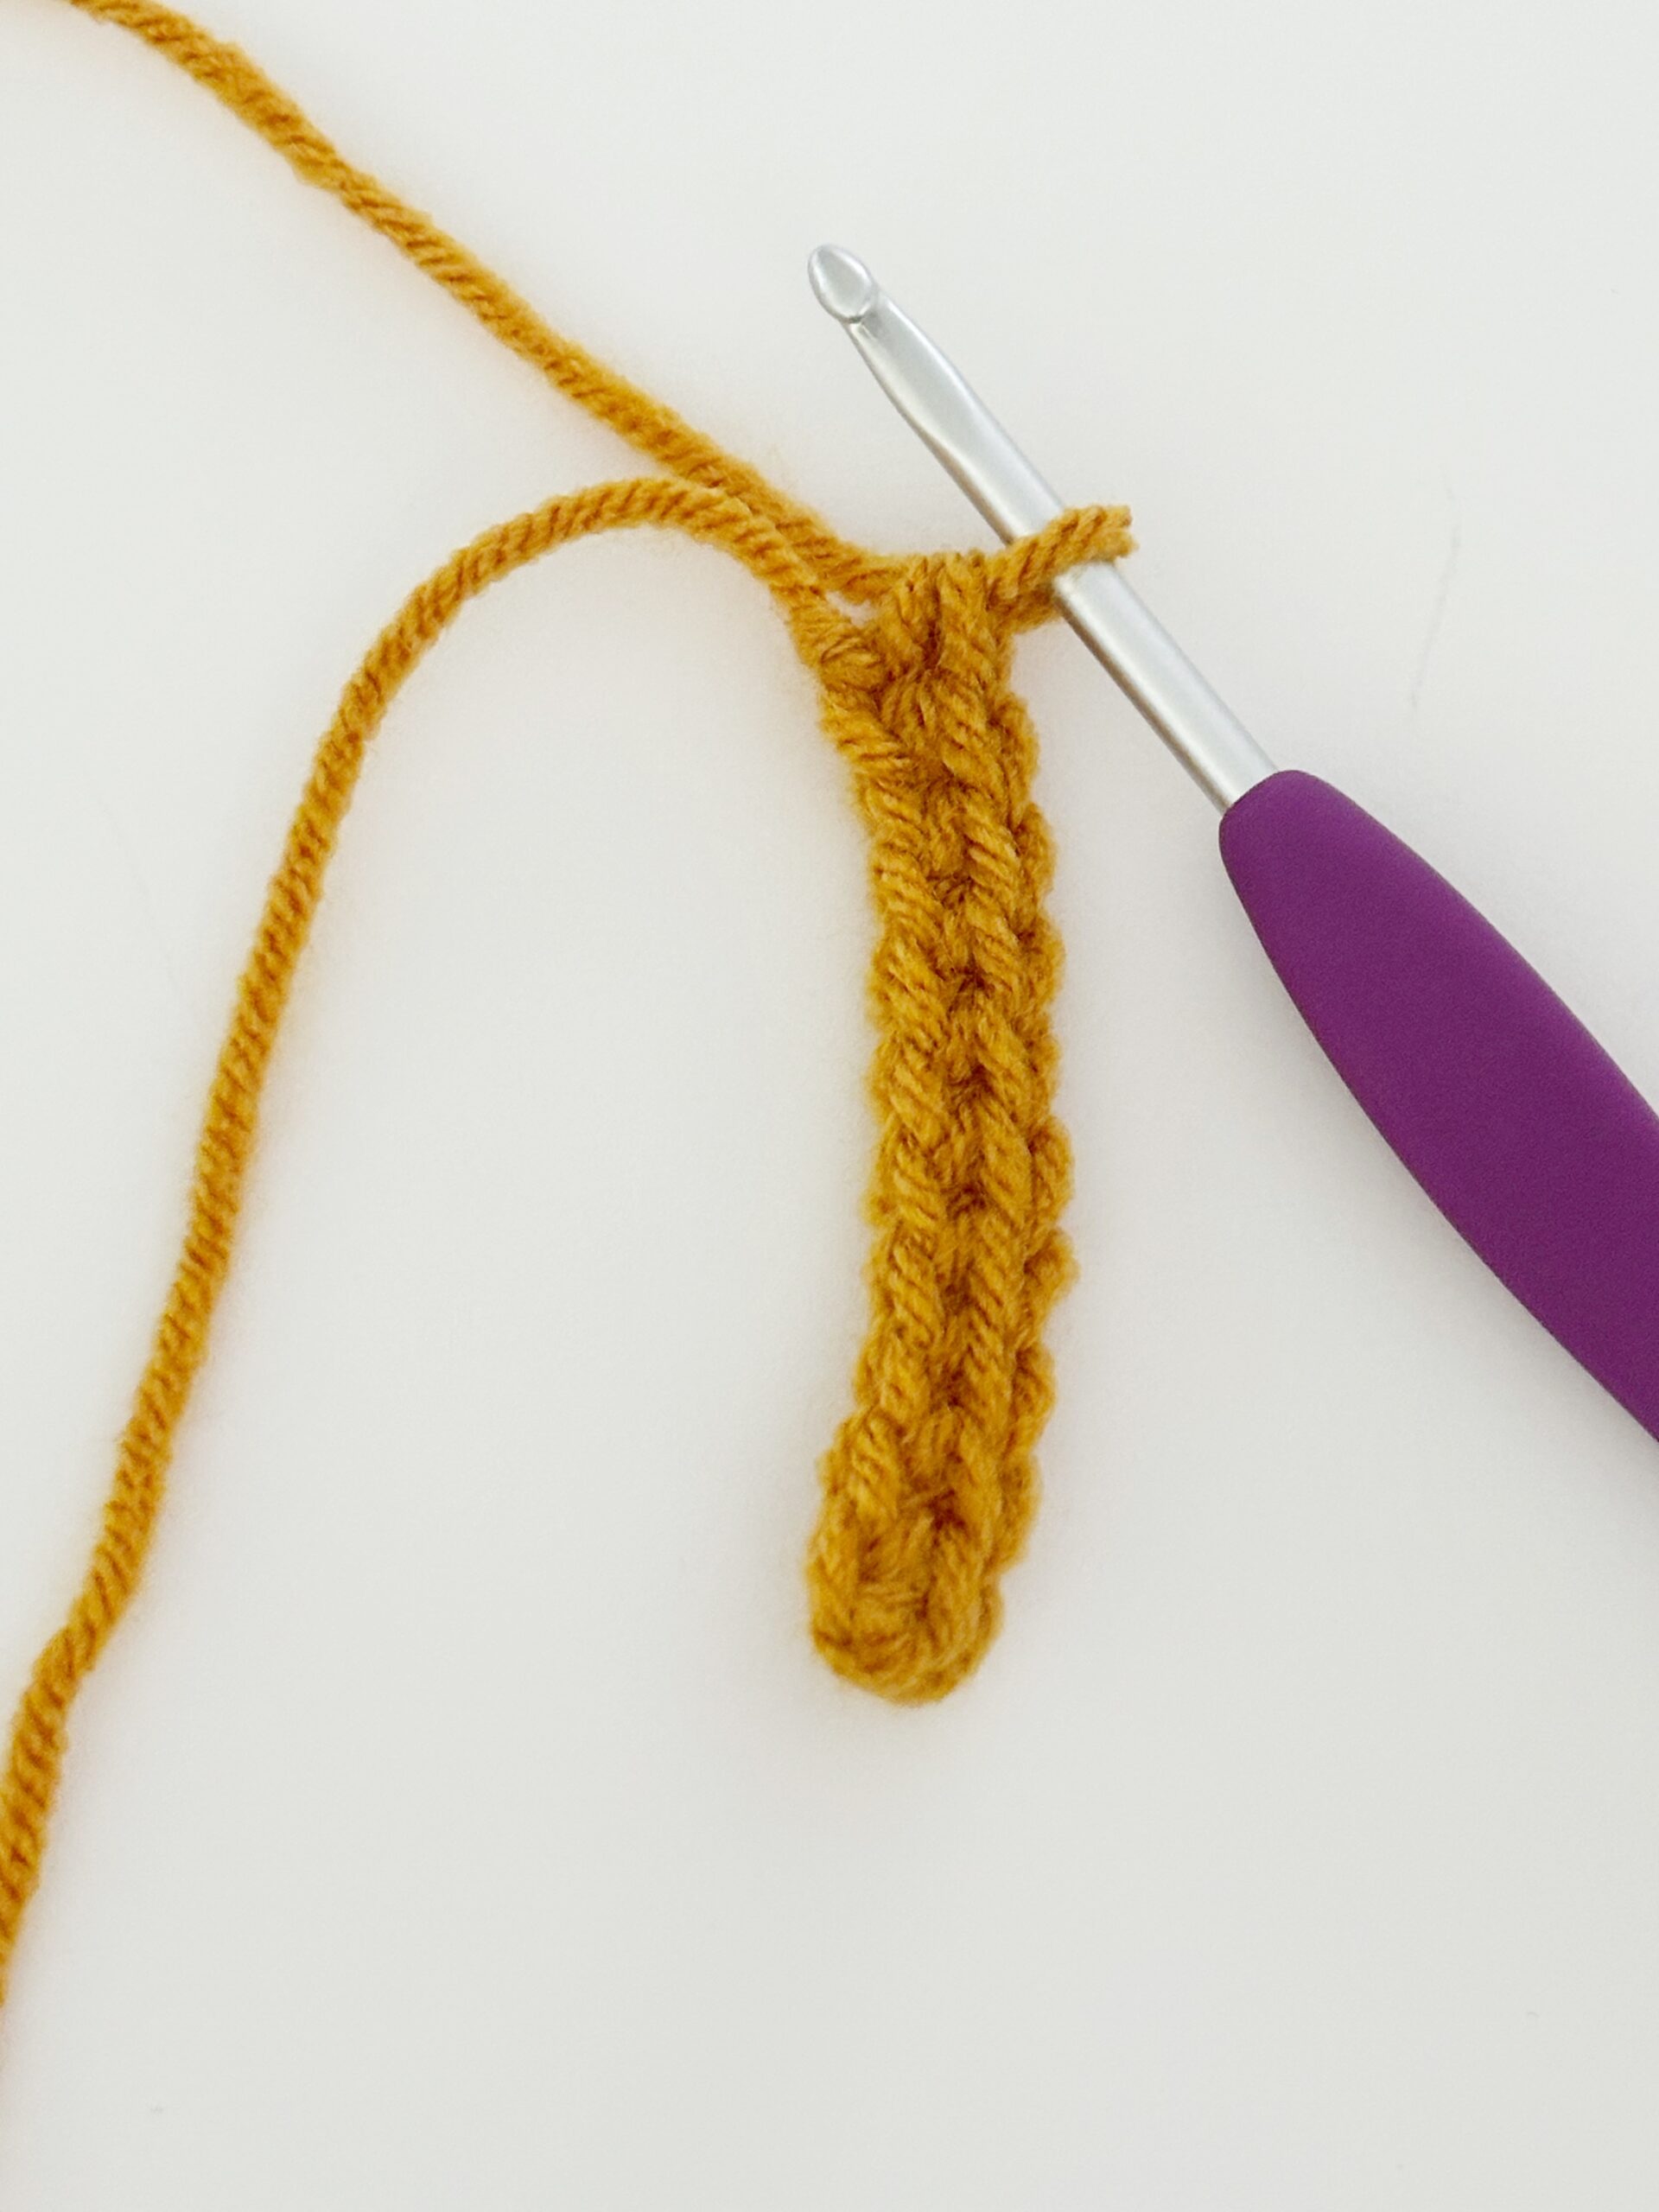 Working in an Oval Shape on the Other Side of the Chain for Amigurumi Crochet Across